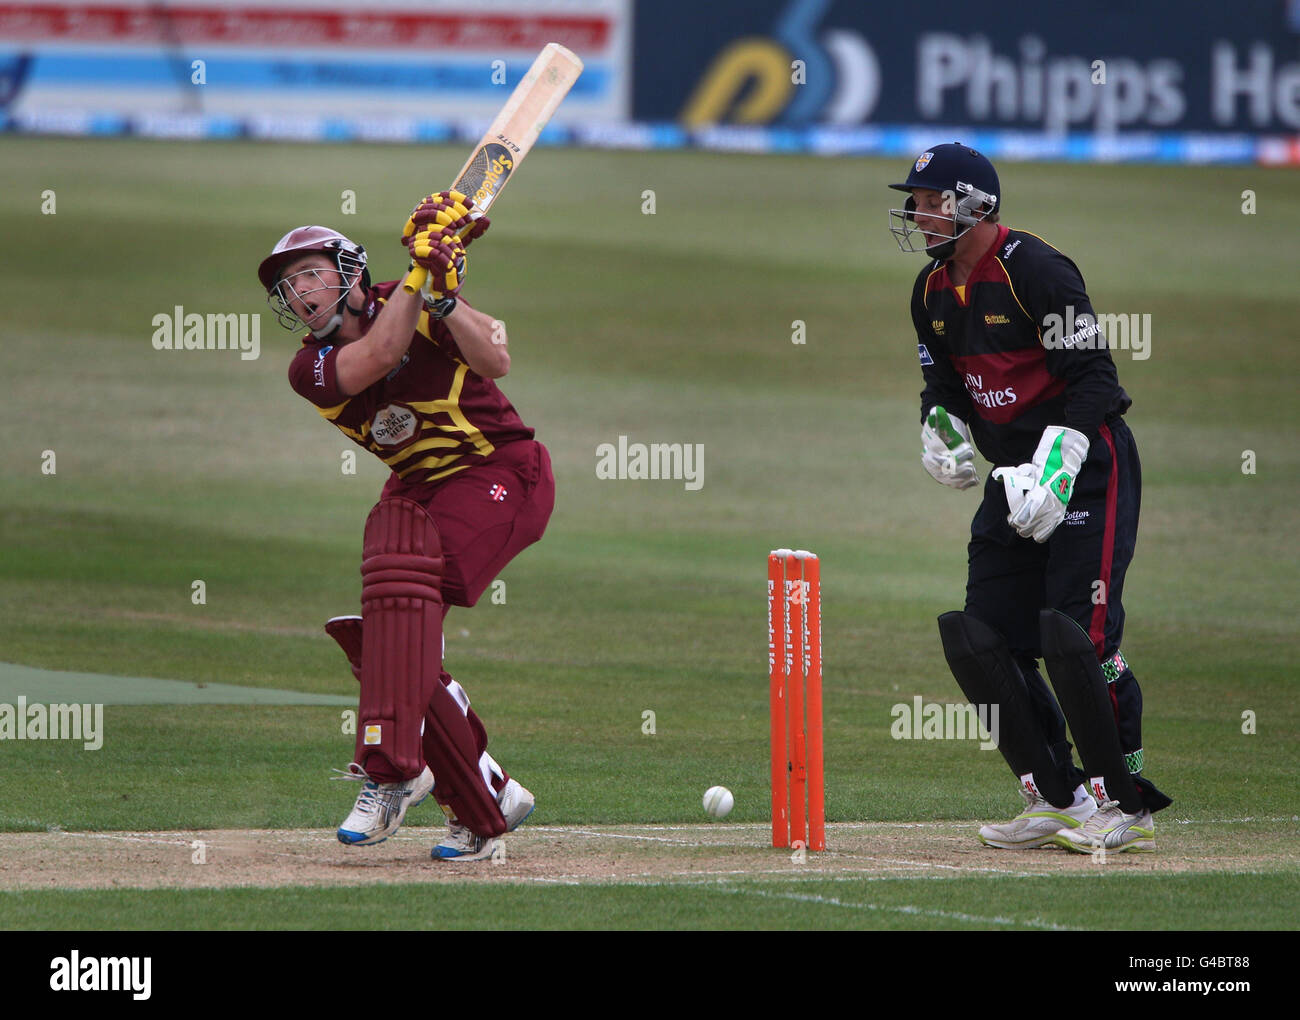 Northamptonshire Steelbacks batsman Rob White is trapped LBW by Durham's bowler Paul Collingwood, watched by wicketkeeper Phil Mustard (right) during the Friends Life T20 North Group match at the County Ground, Northamptonshire. Stock Photo